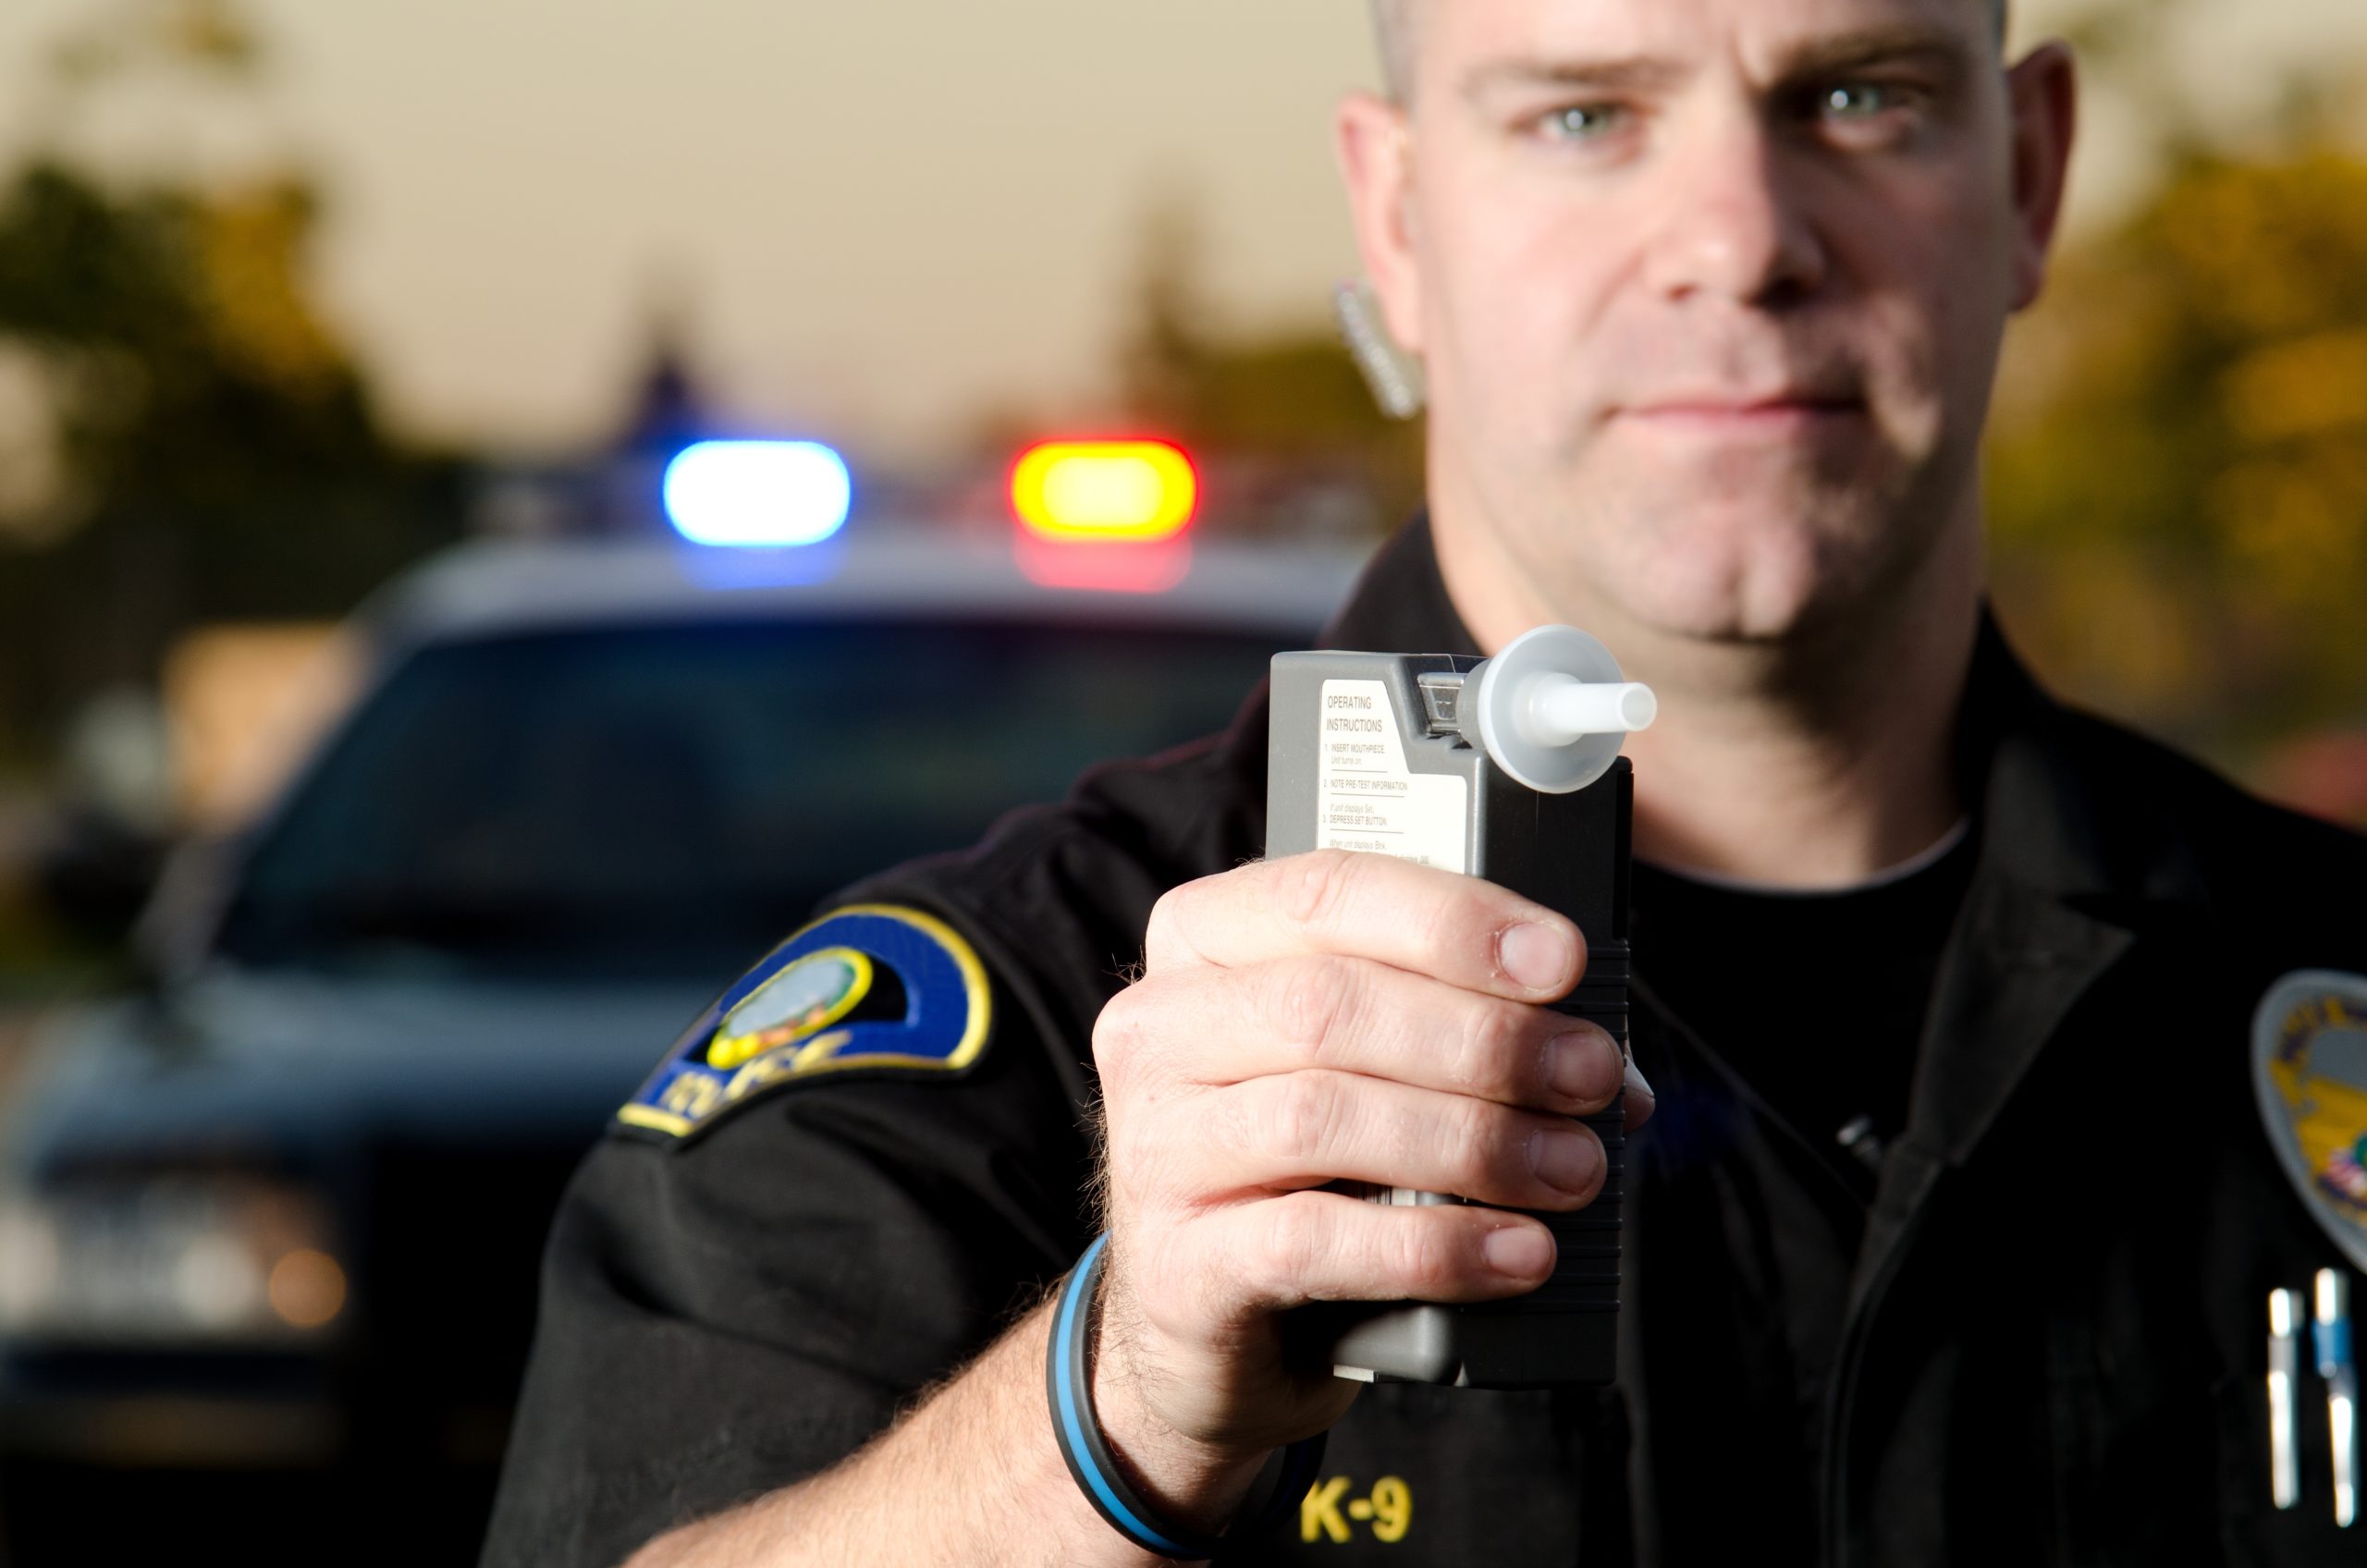 A drug or alcohol related driving charge can have wide ranging negative repercussions.